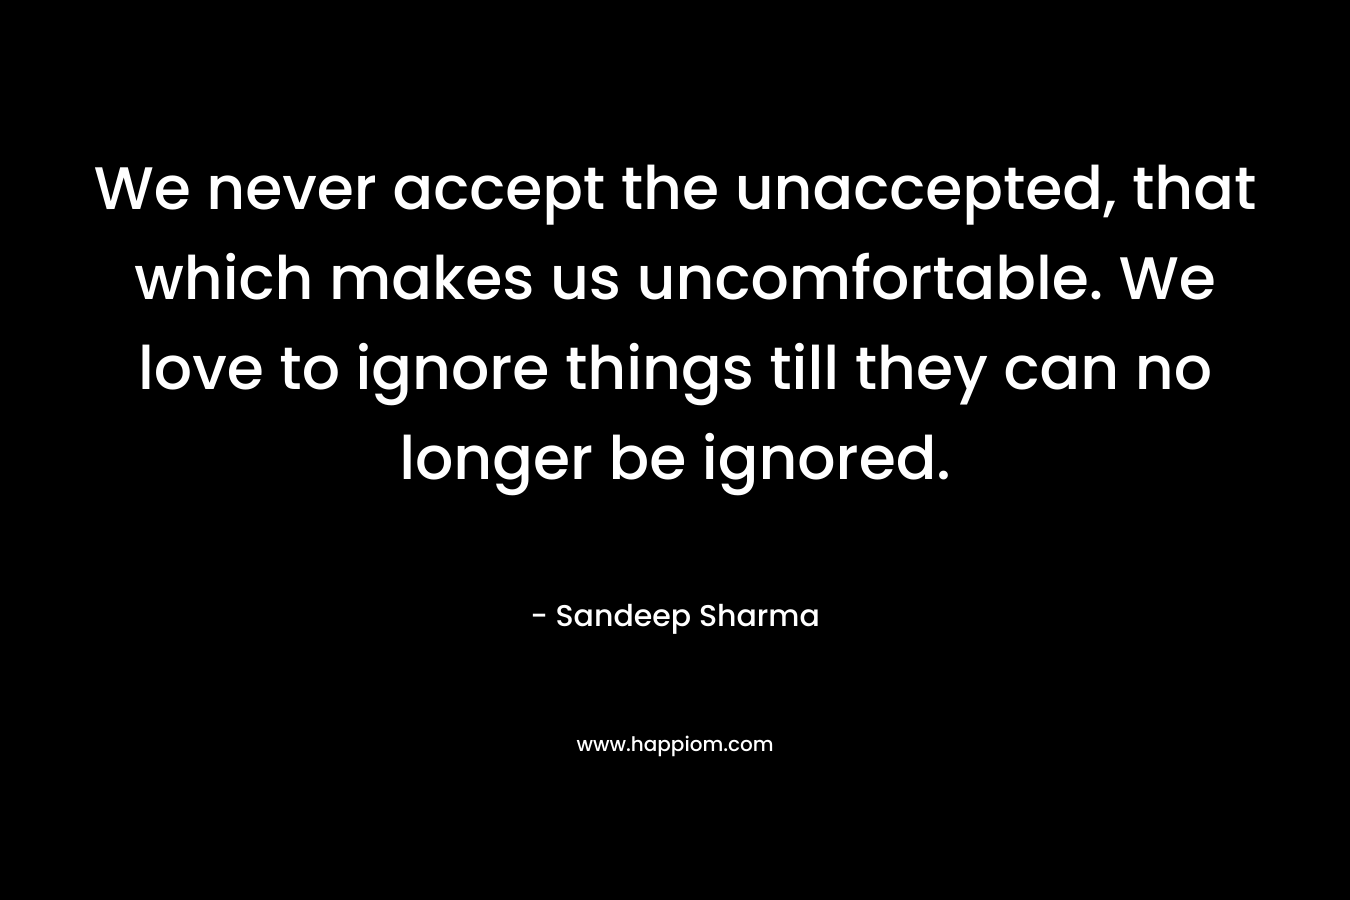 We never accept the unaccepted, that which makes us uncomfortable. We love to ignore things till they can no longer be ignored.